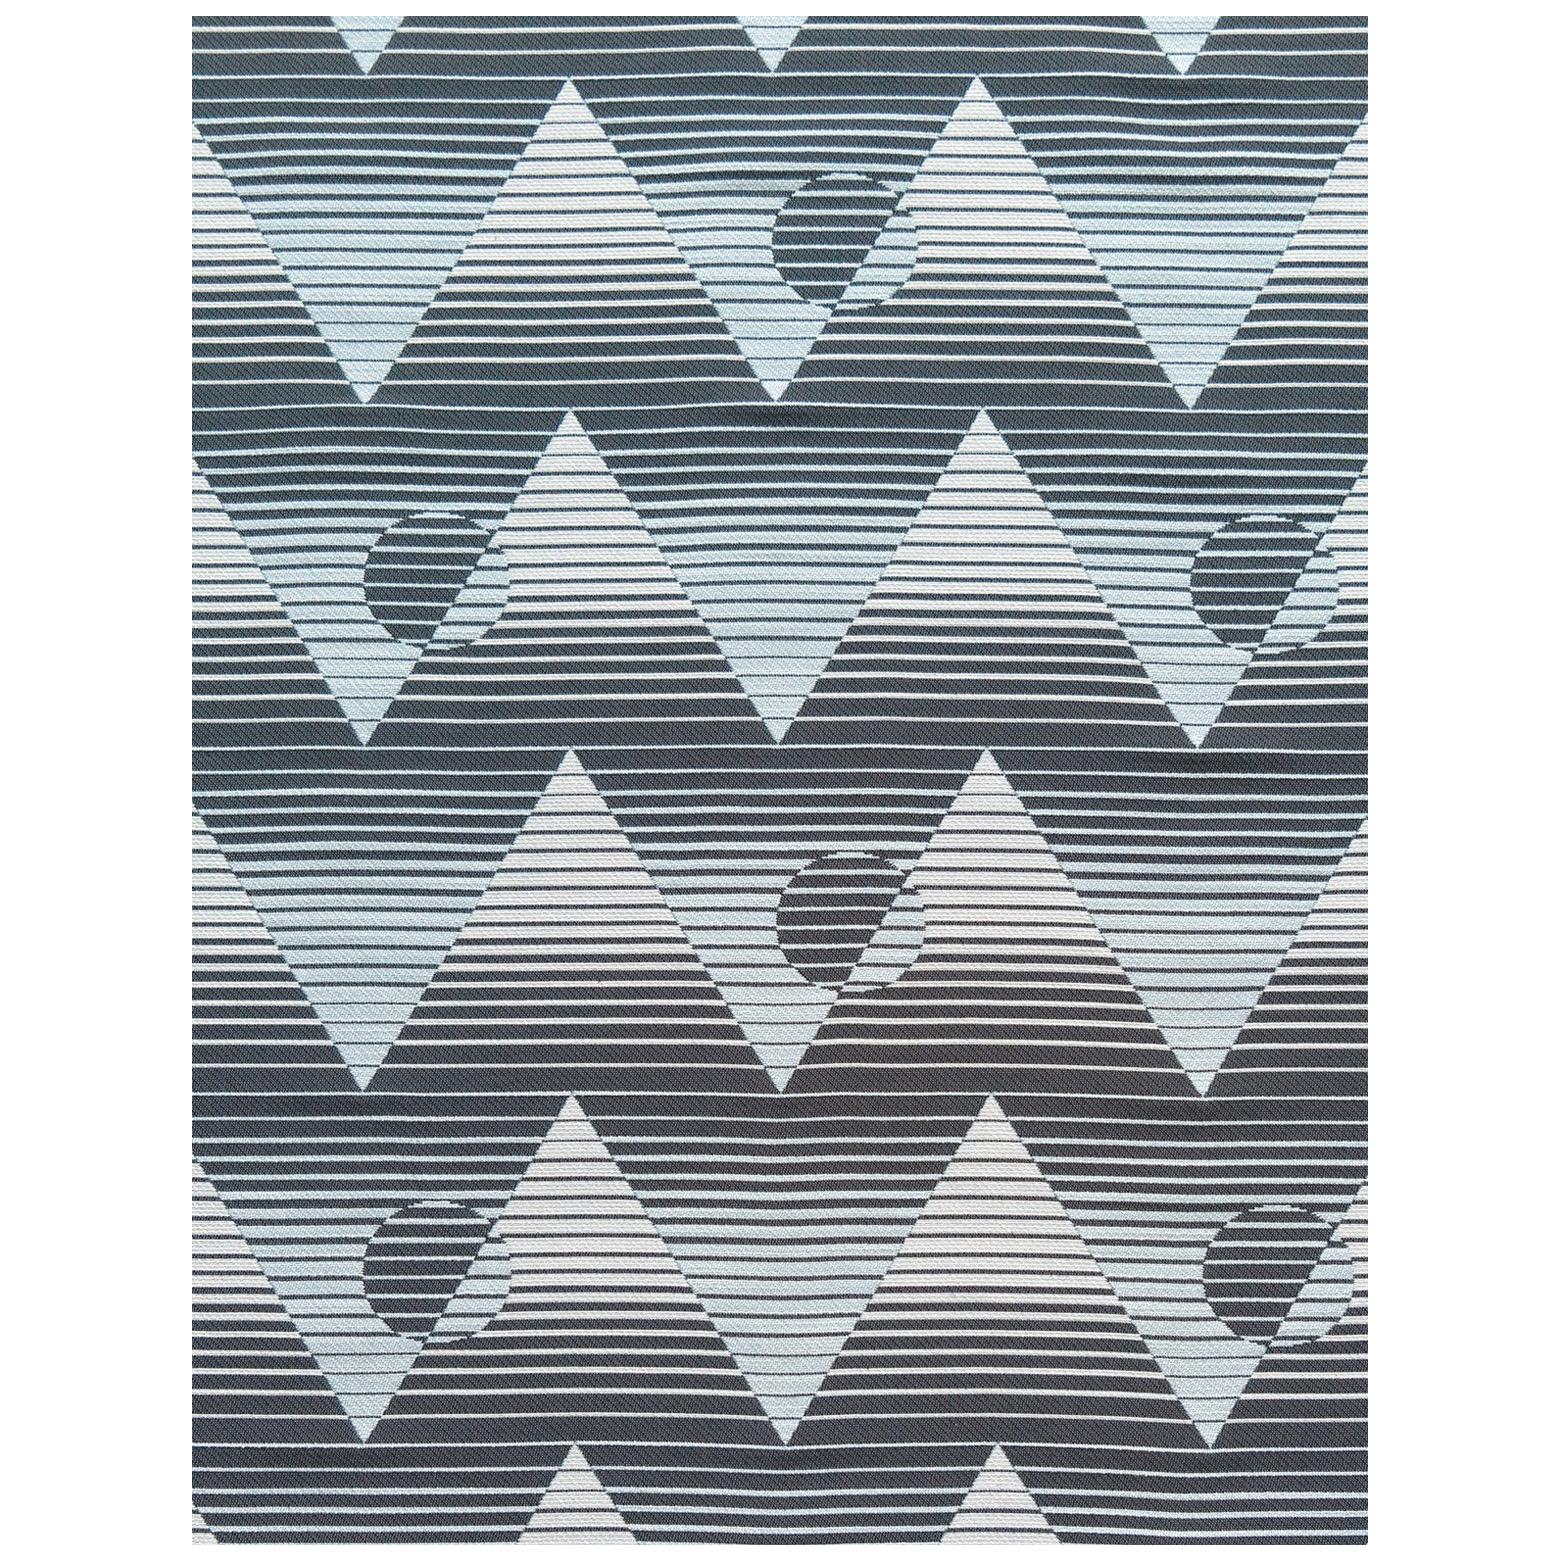 Pyramide Du Soleil Woven Commercial Grade Fabric in Halo, Black, White and Blue